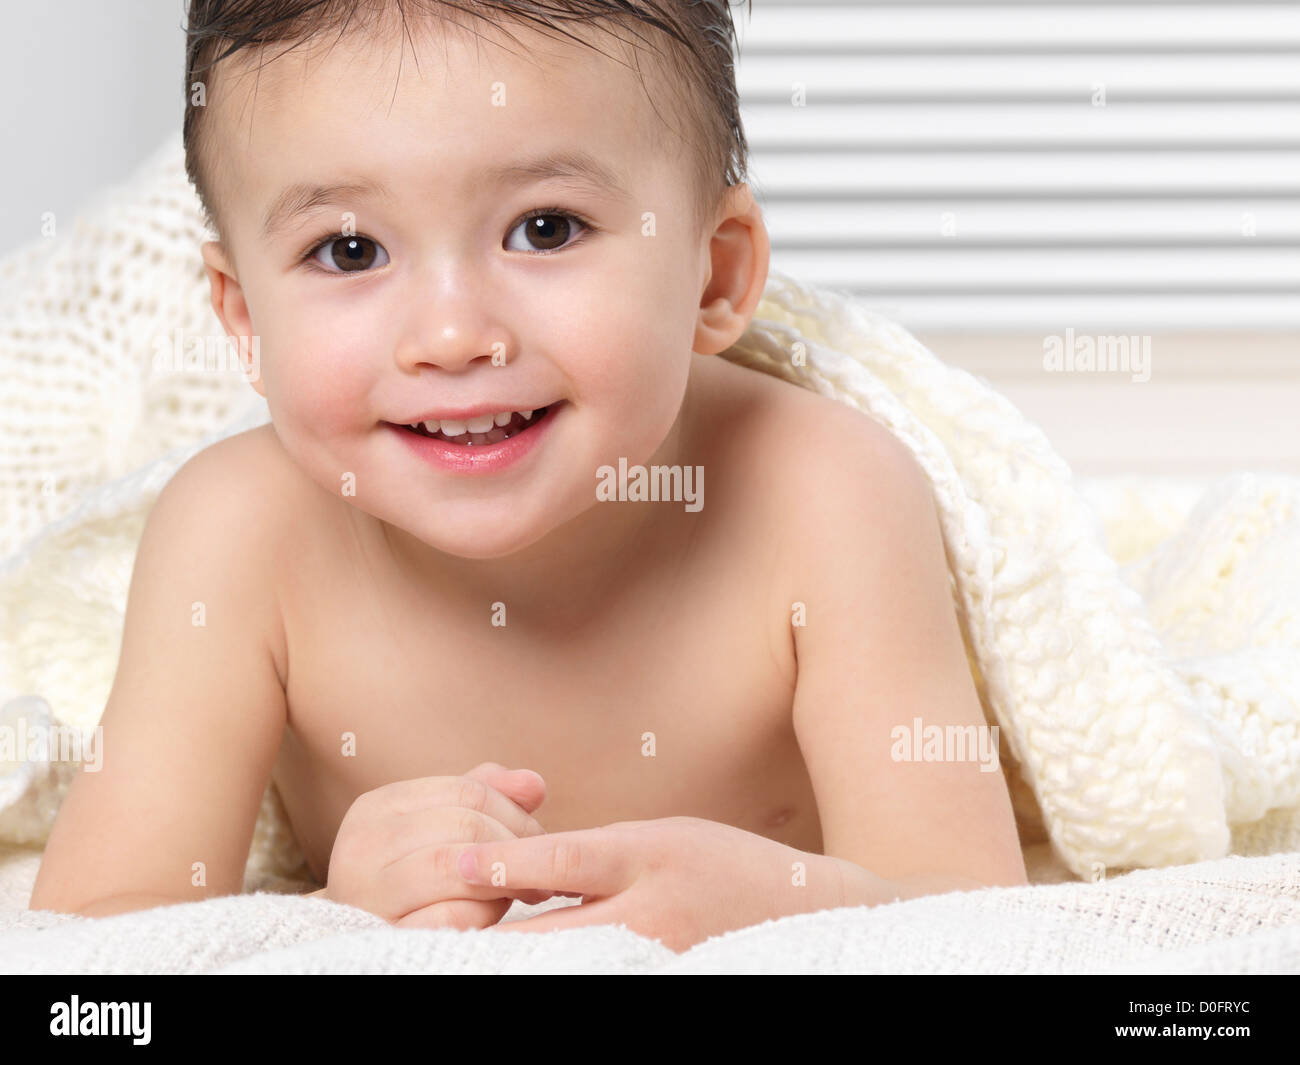 Portrait Of A Cute Smiling Two Year Old Baby Boy Lying On A Bed Under A Blanket Stock Photo Alamy